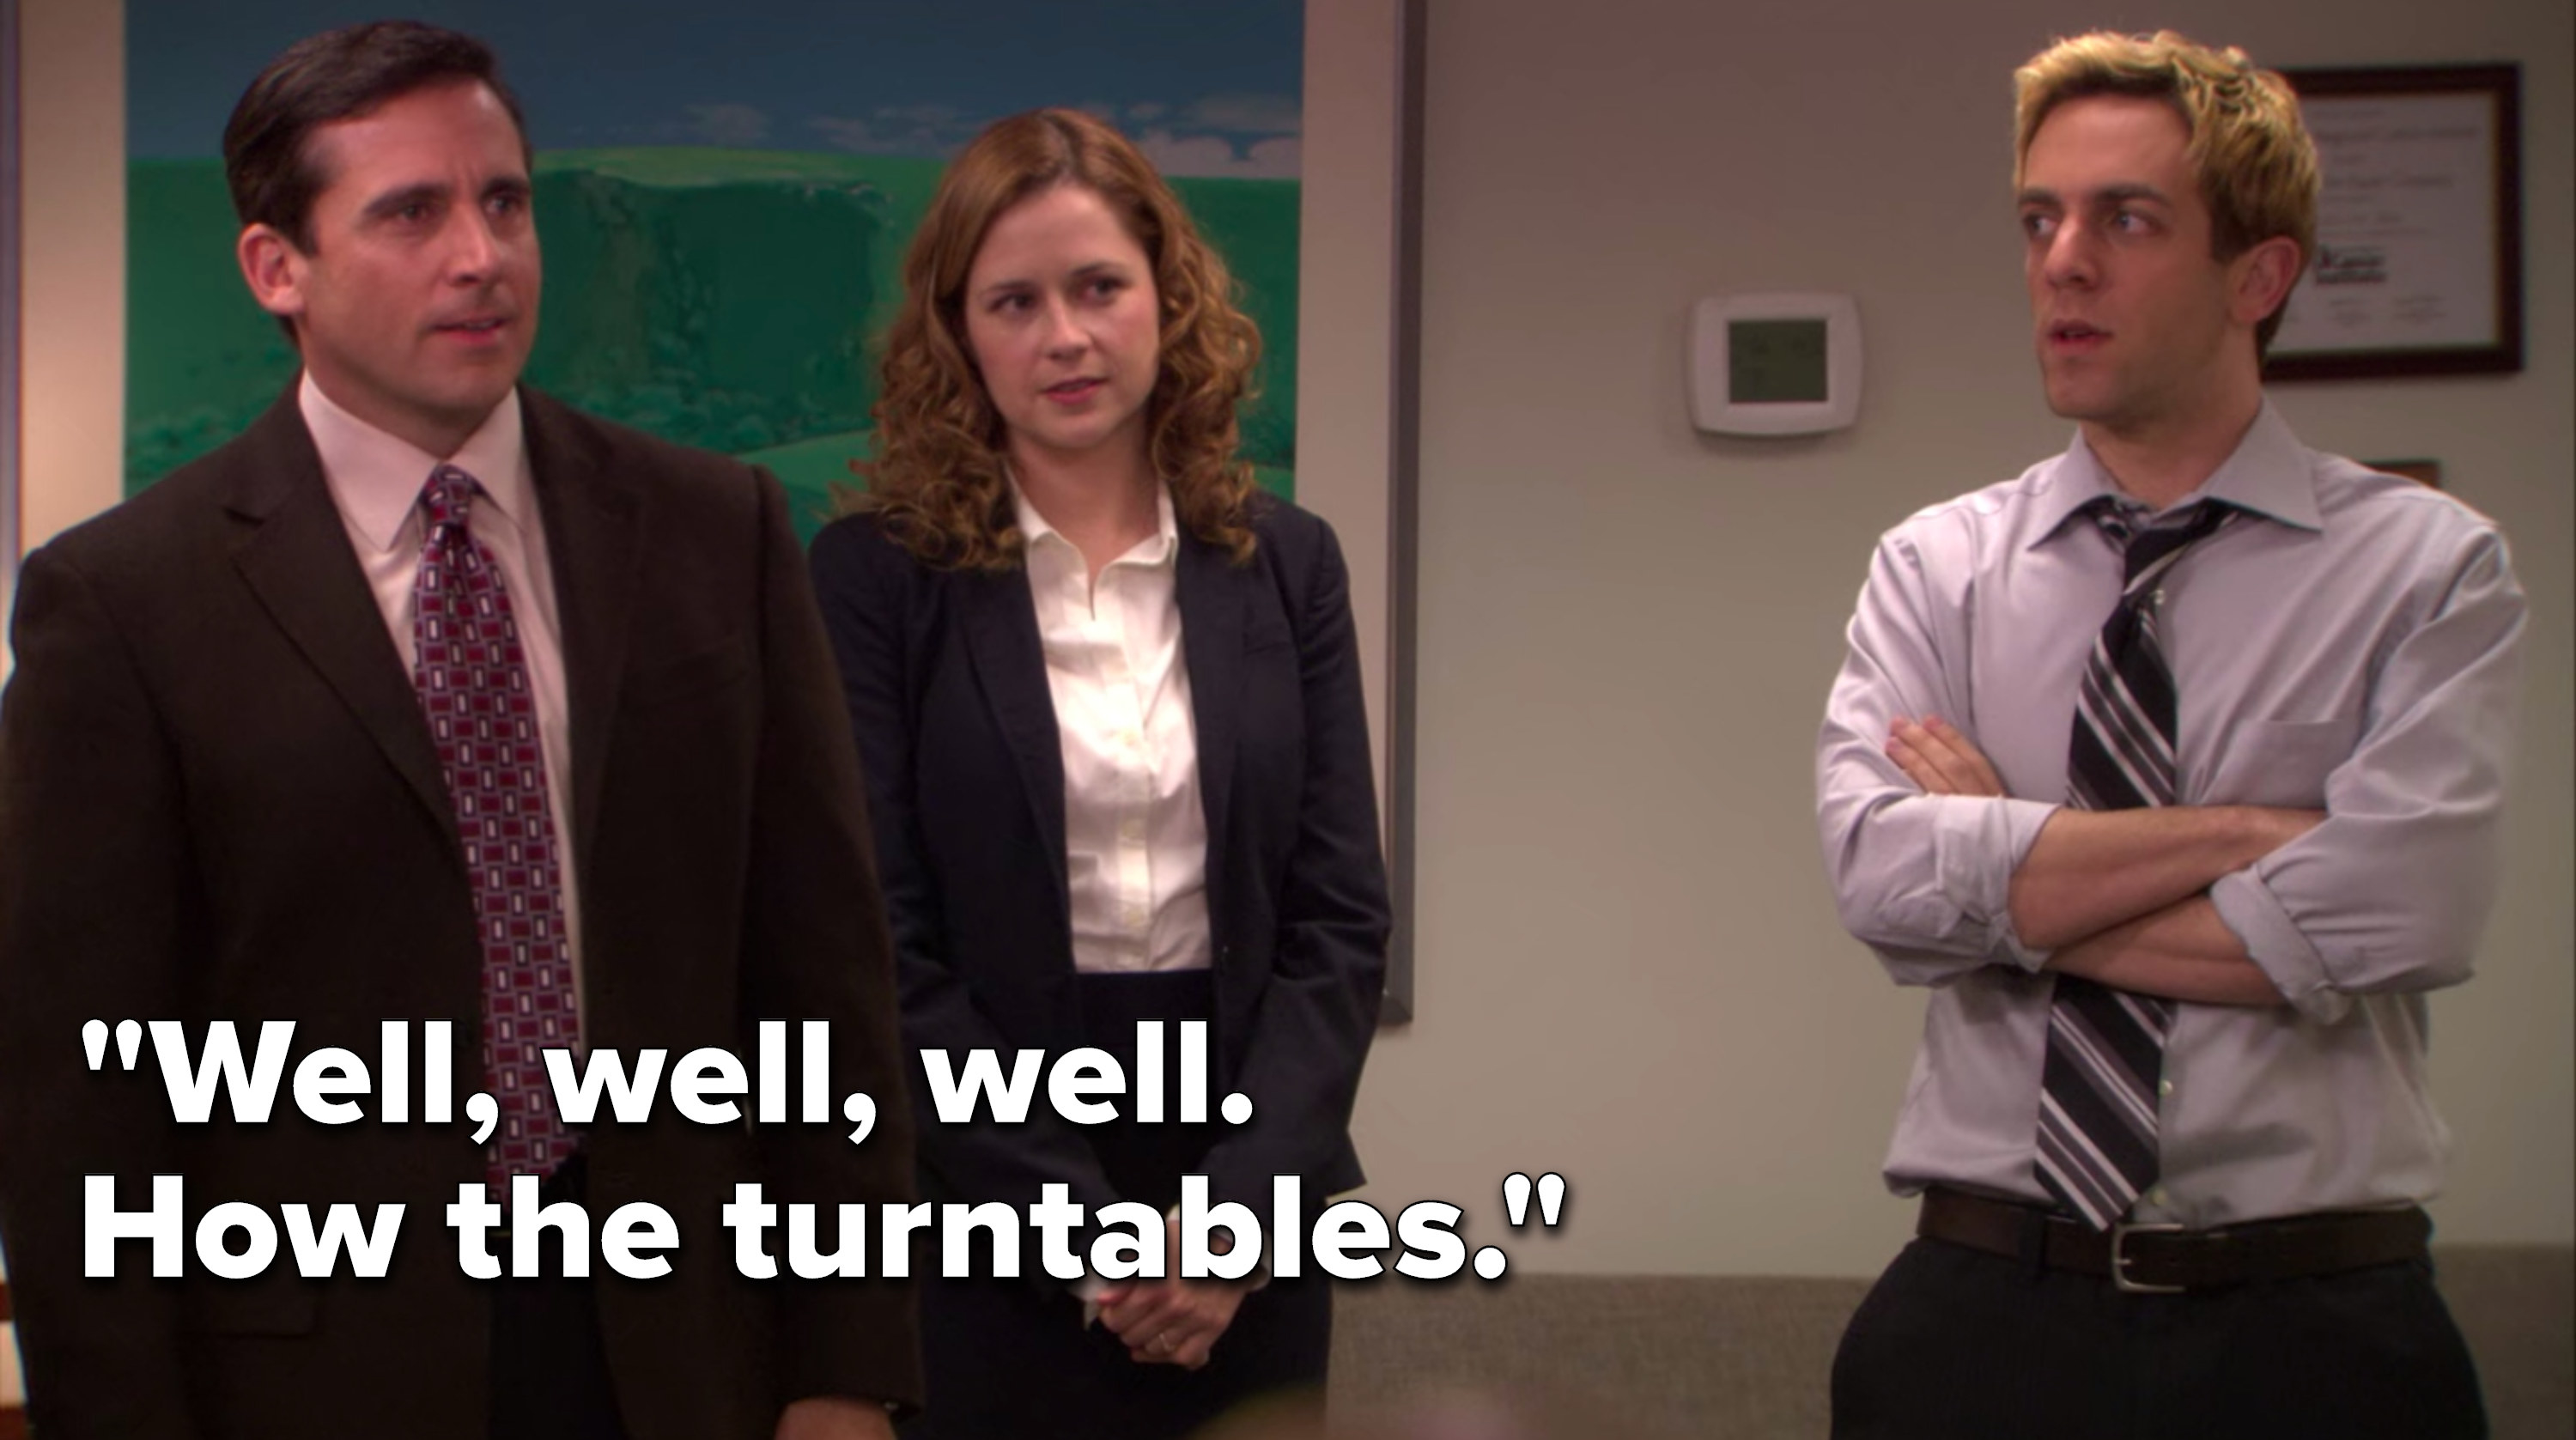 On The Office, Michael says, Well, well, well, how the turntables